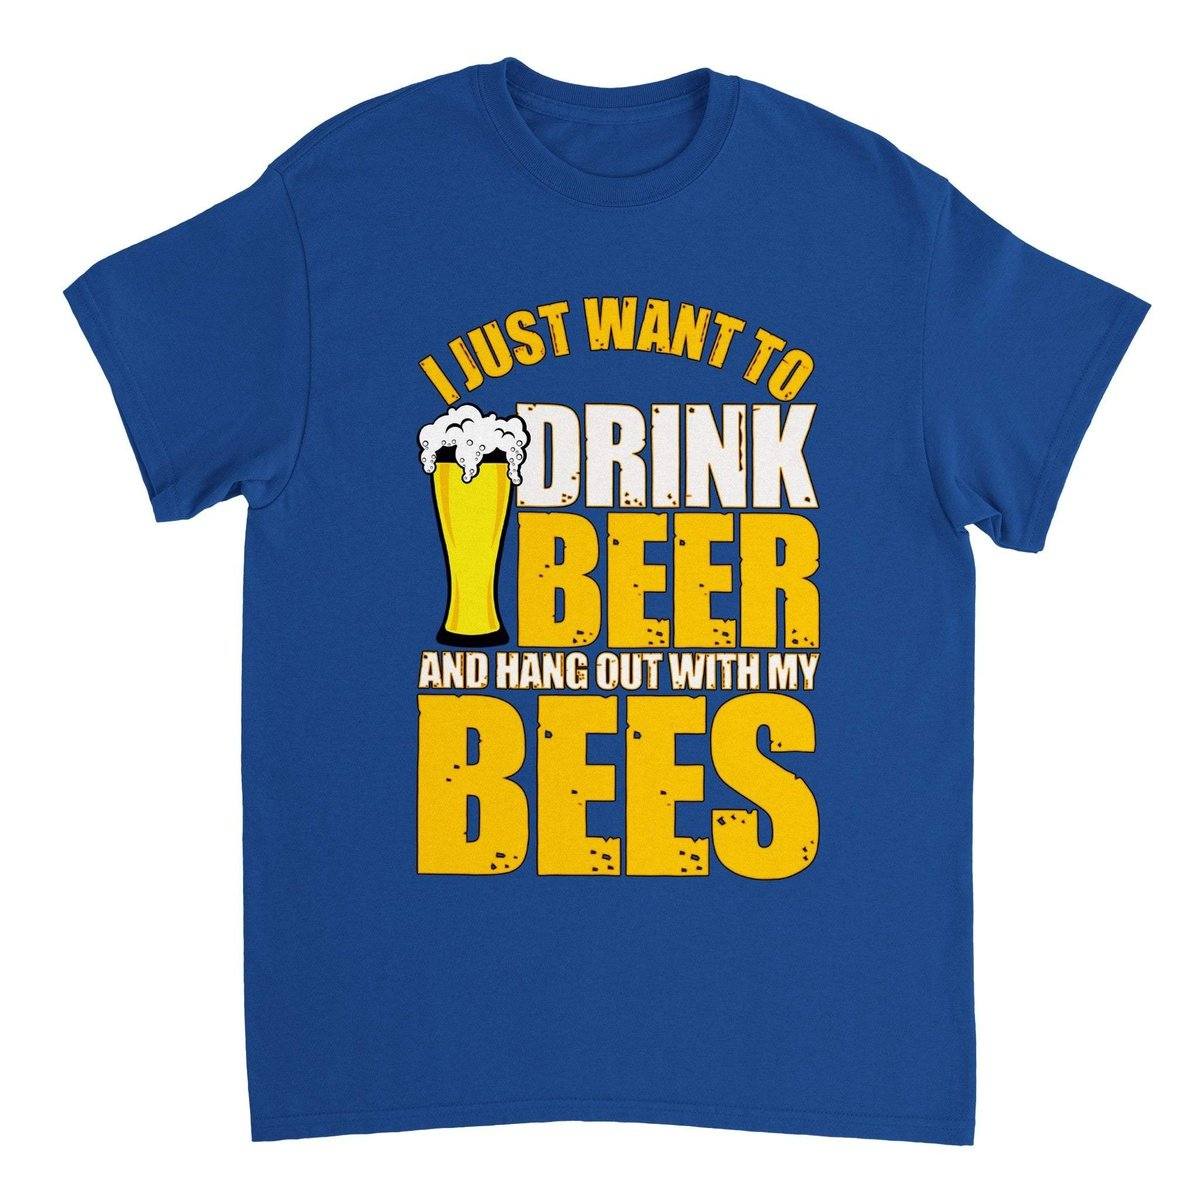 I Just Want To Drink Beer And Hang Out With My Bees T-Shirt - Funny Bee Beer Tshirt - Unisex Crewneck T-shirt Australia Online Color Royal / S